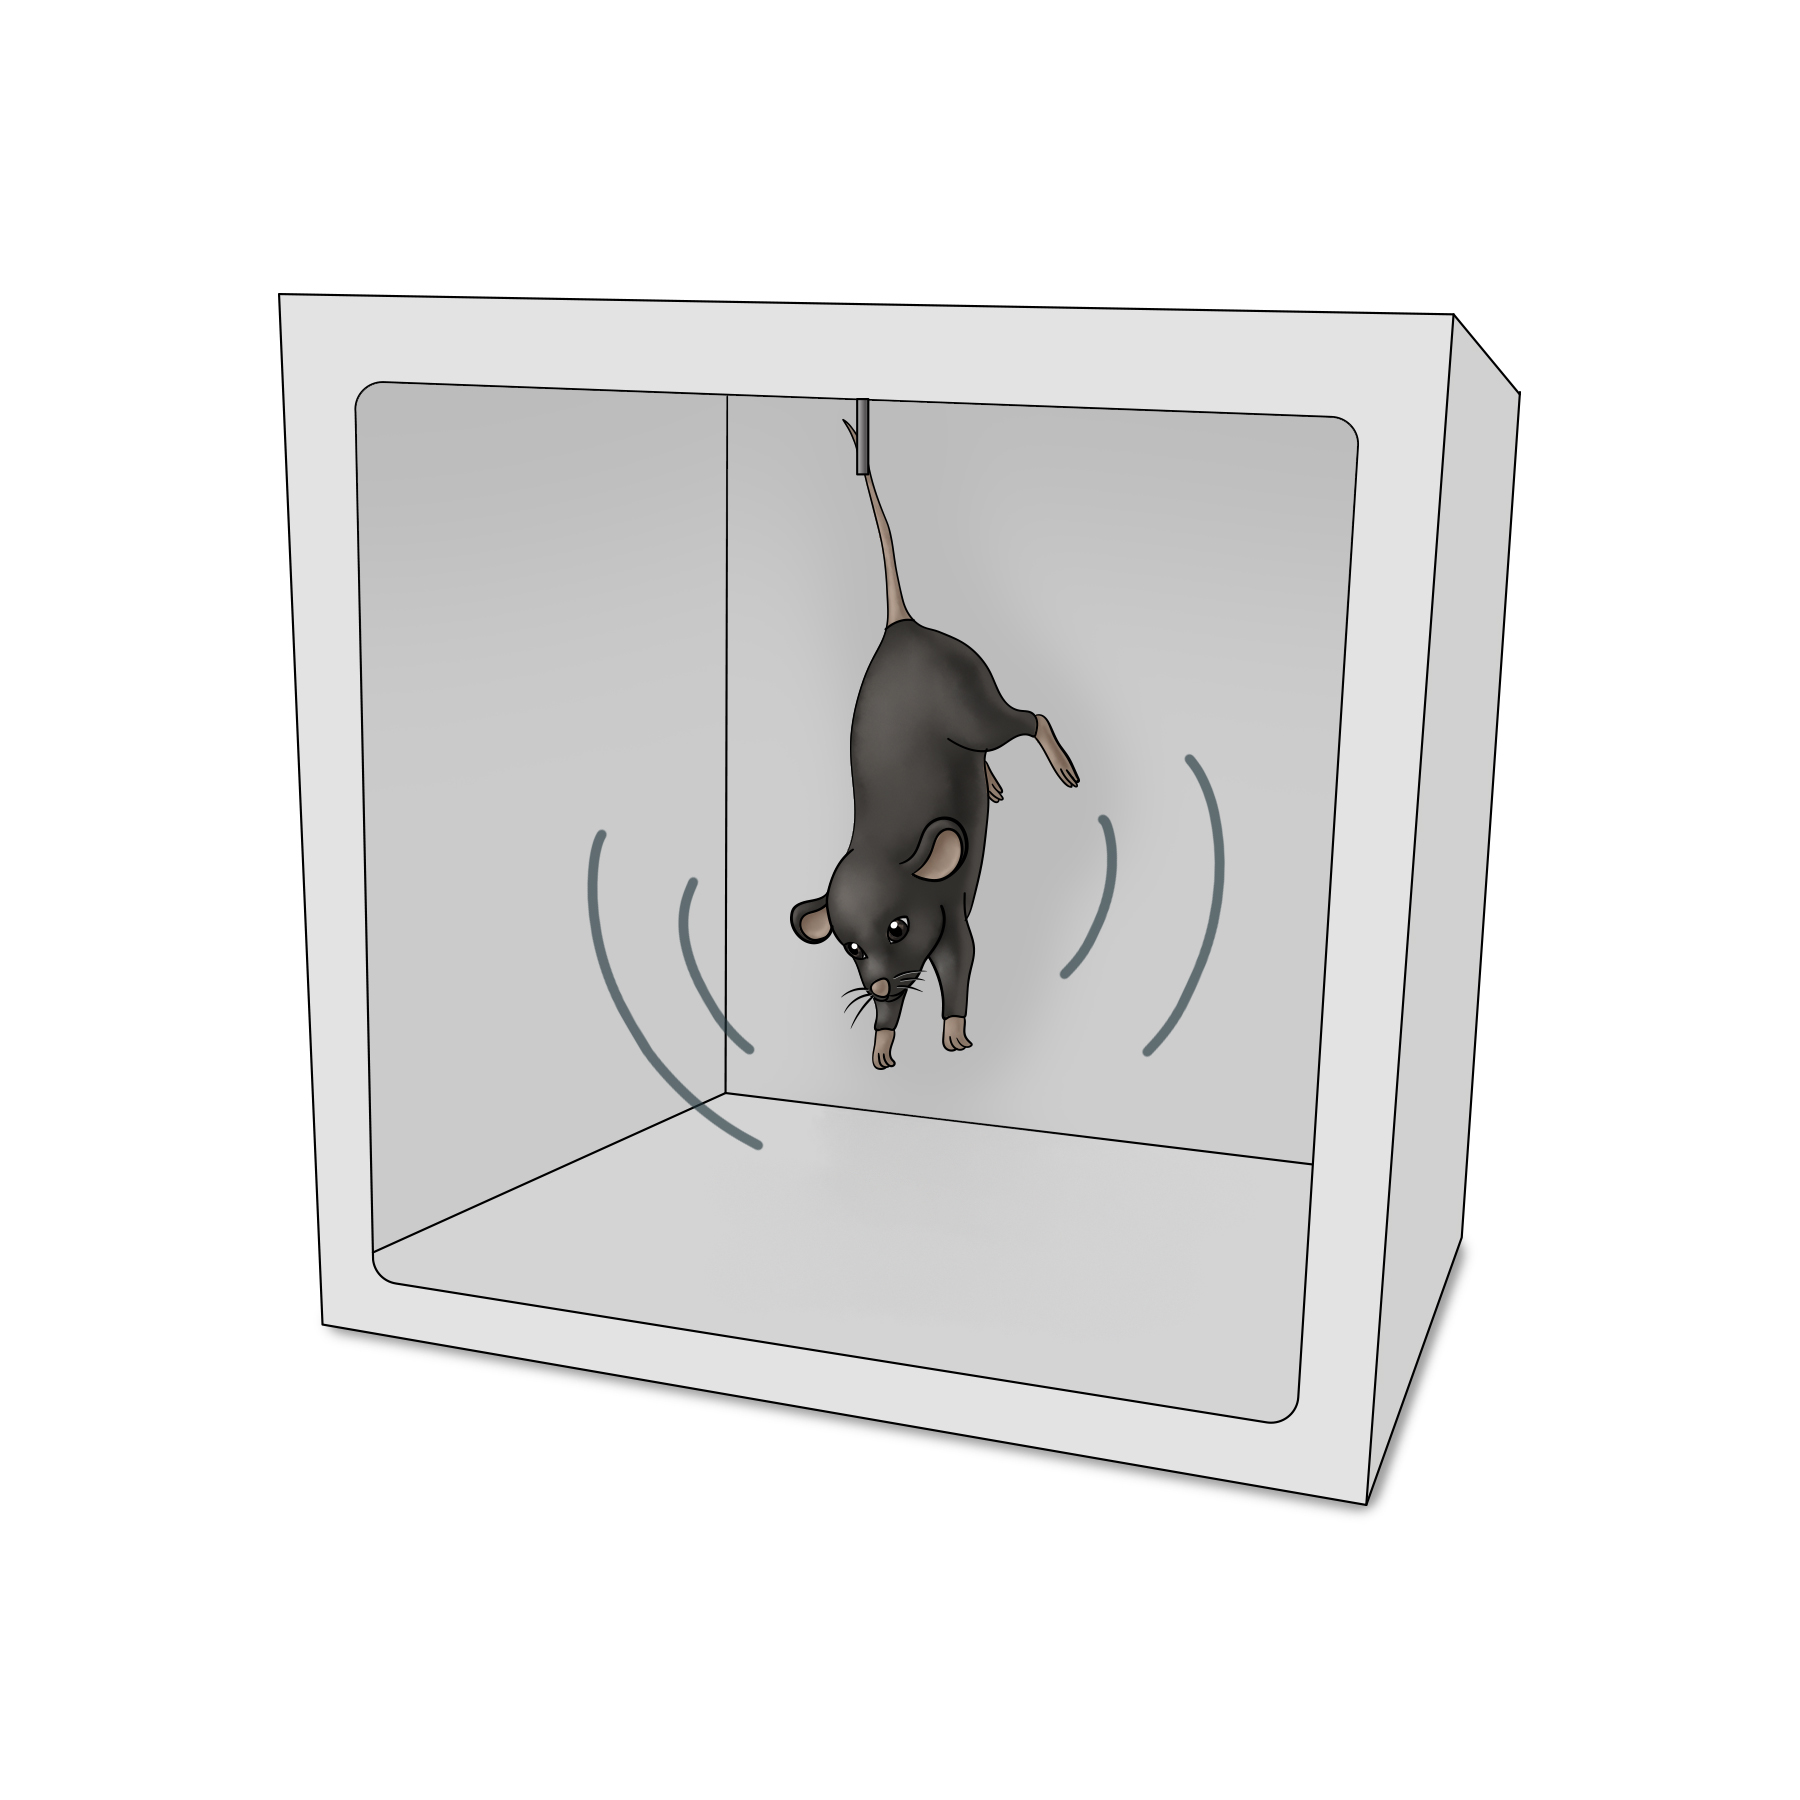 Tail suspension test shows rat being suspended by its tail inside a container